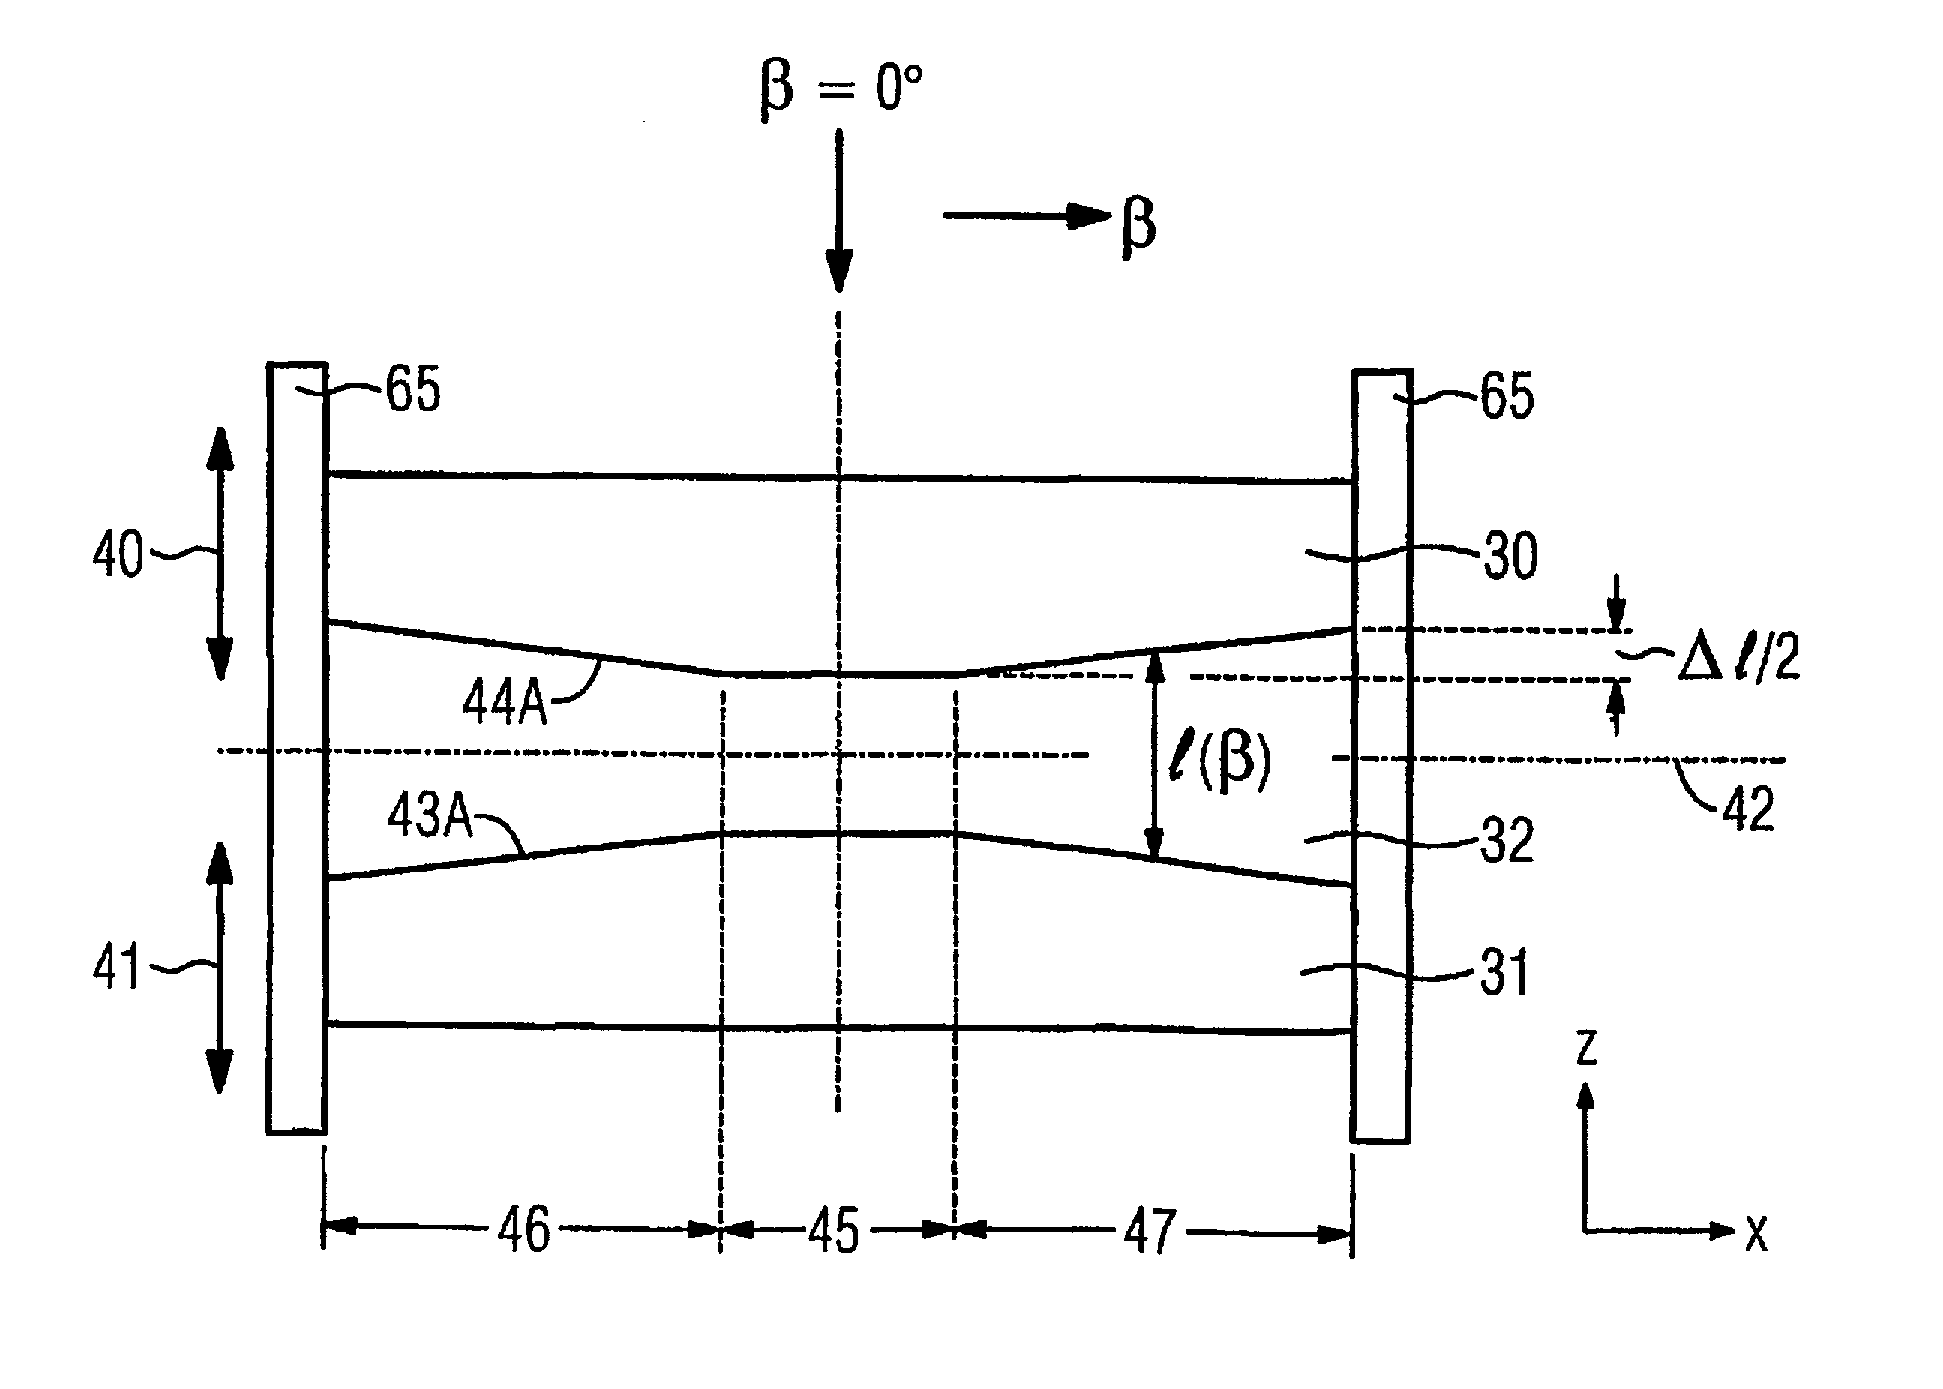 Computed tomography apparatus and beam diaphragm therefor having absorber elements shaped to produce a non-uniform beam passage opening